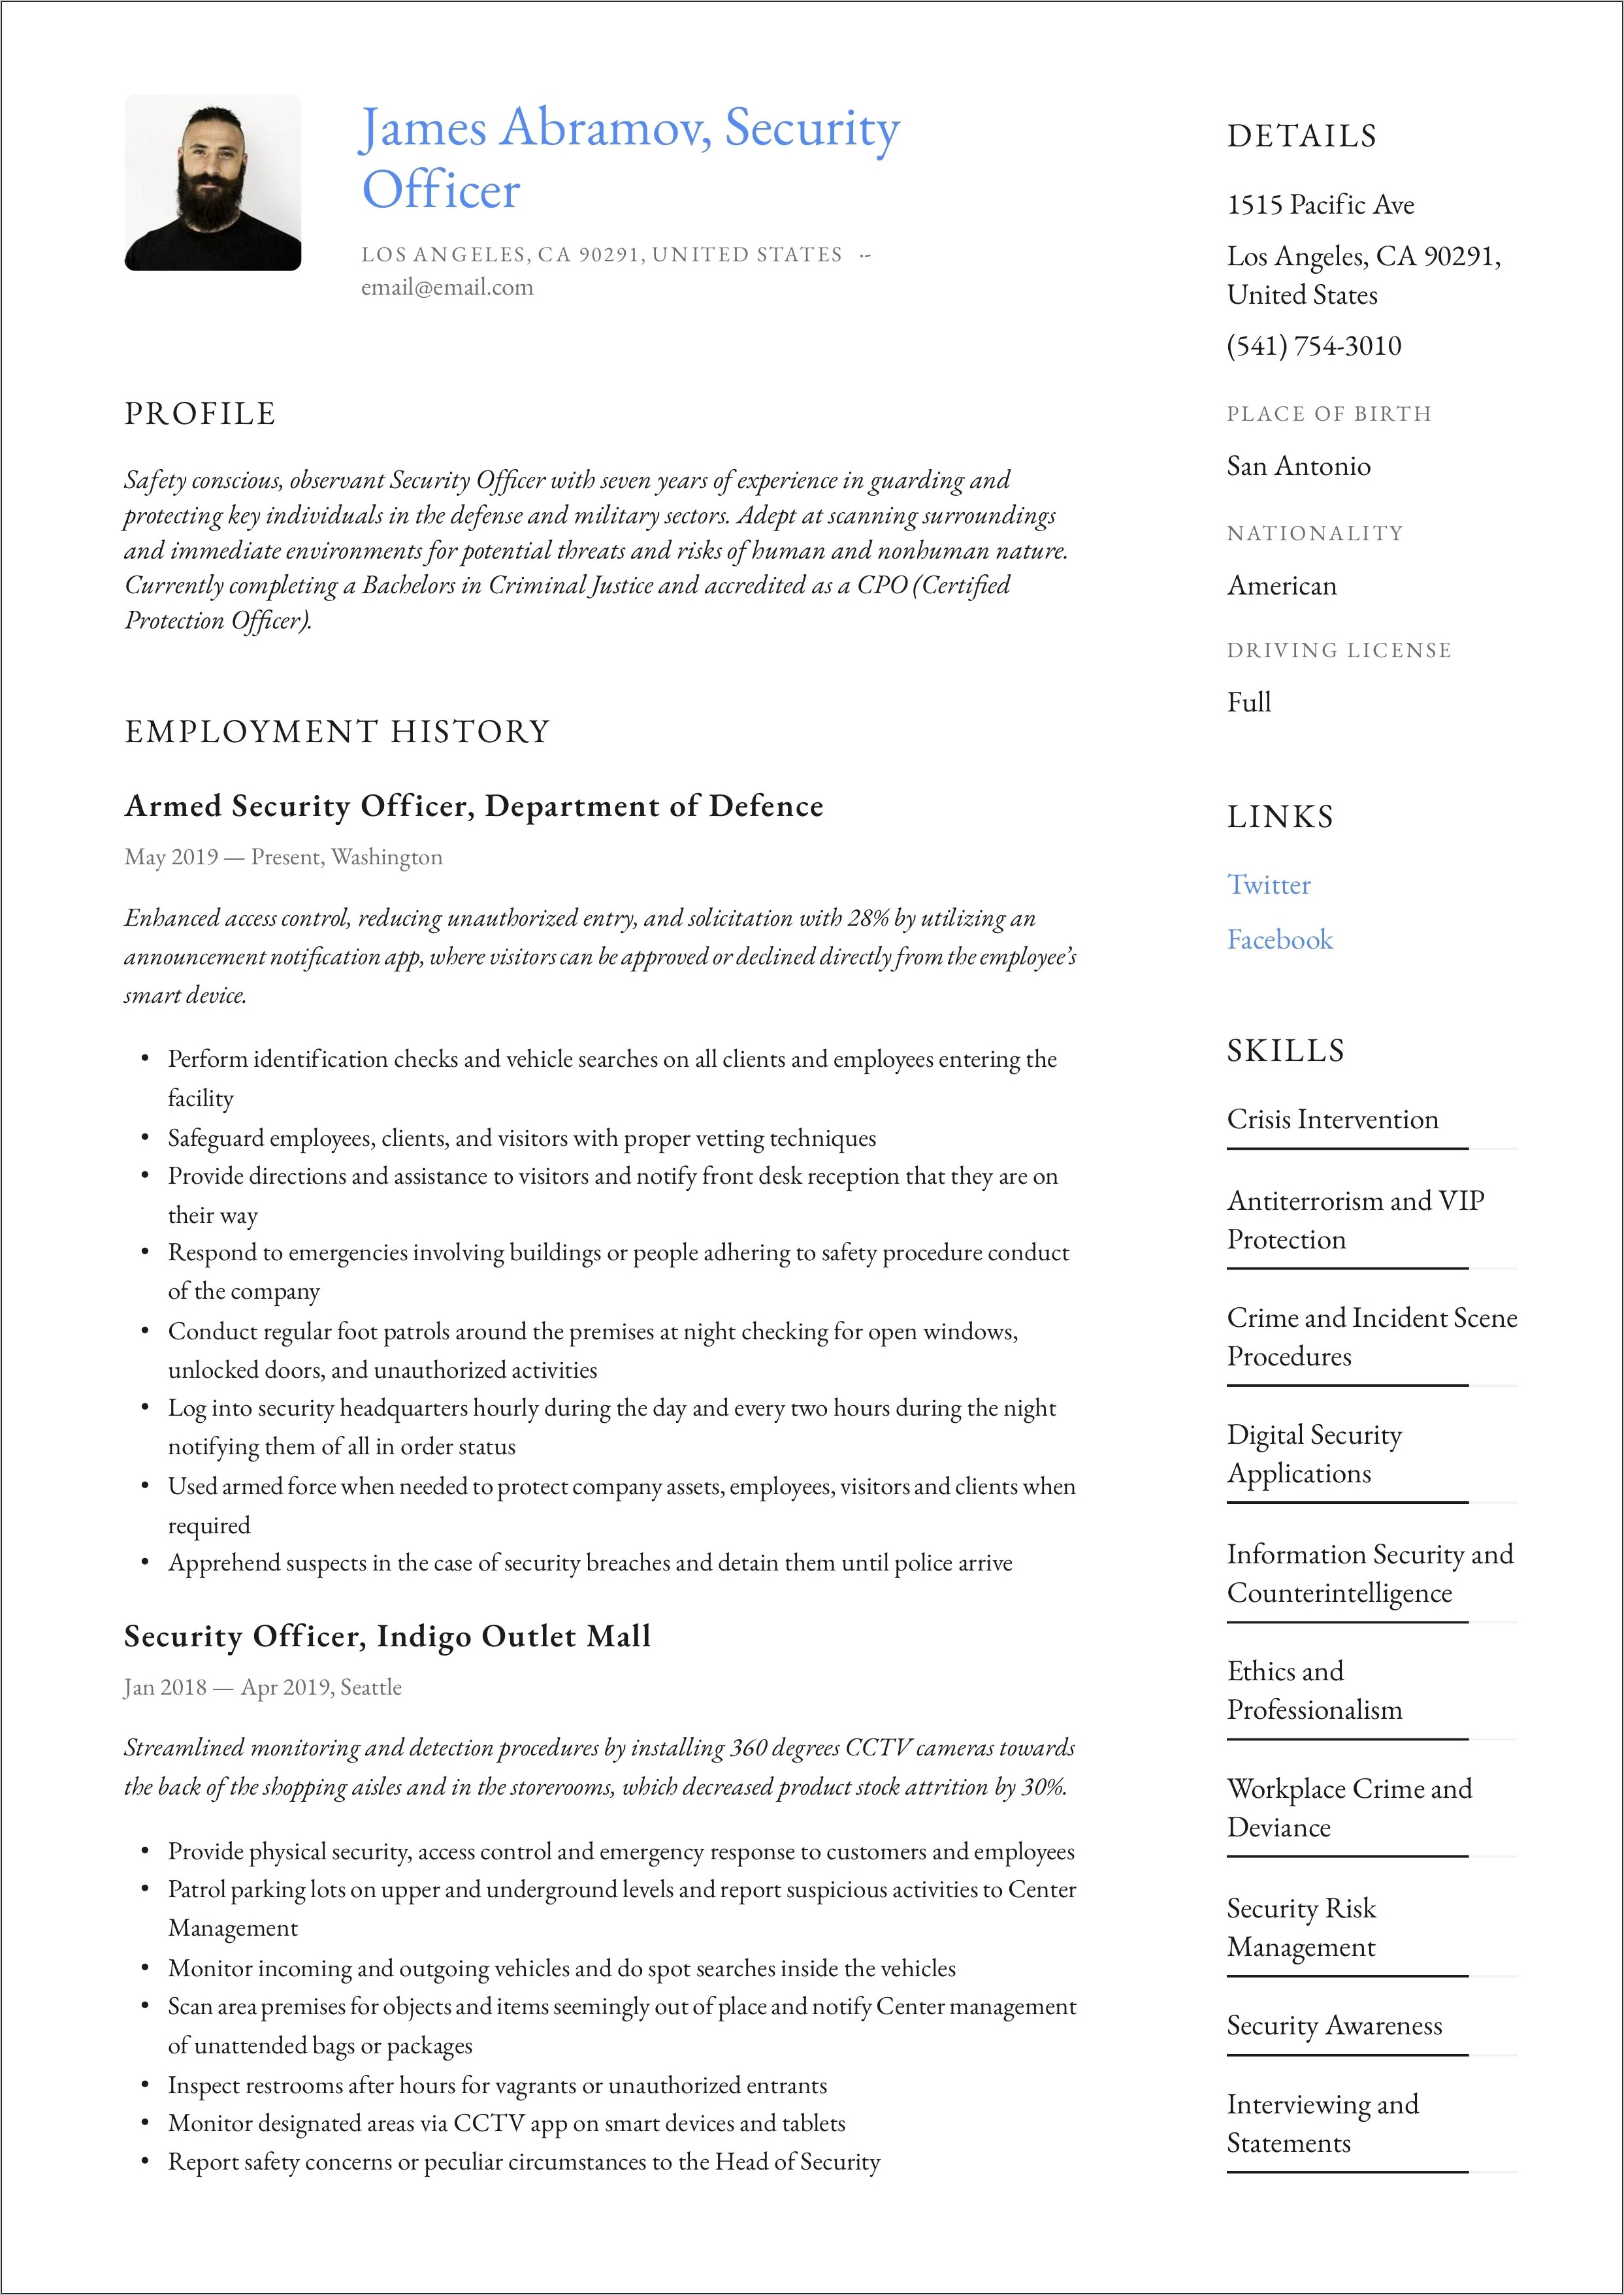 Show Me Completed Resume Example For Security Officer